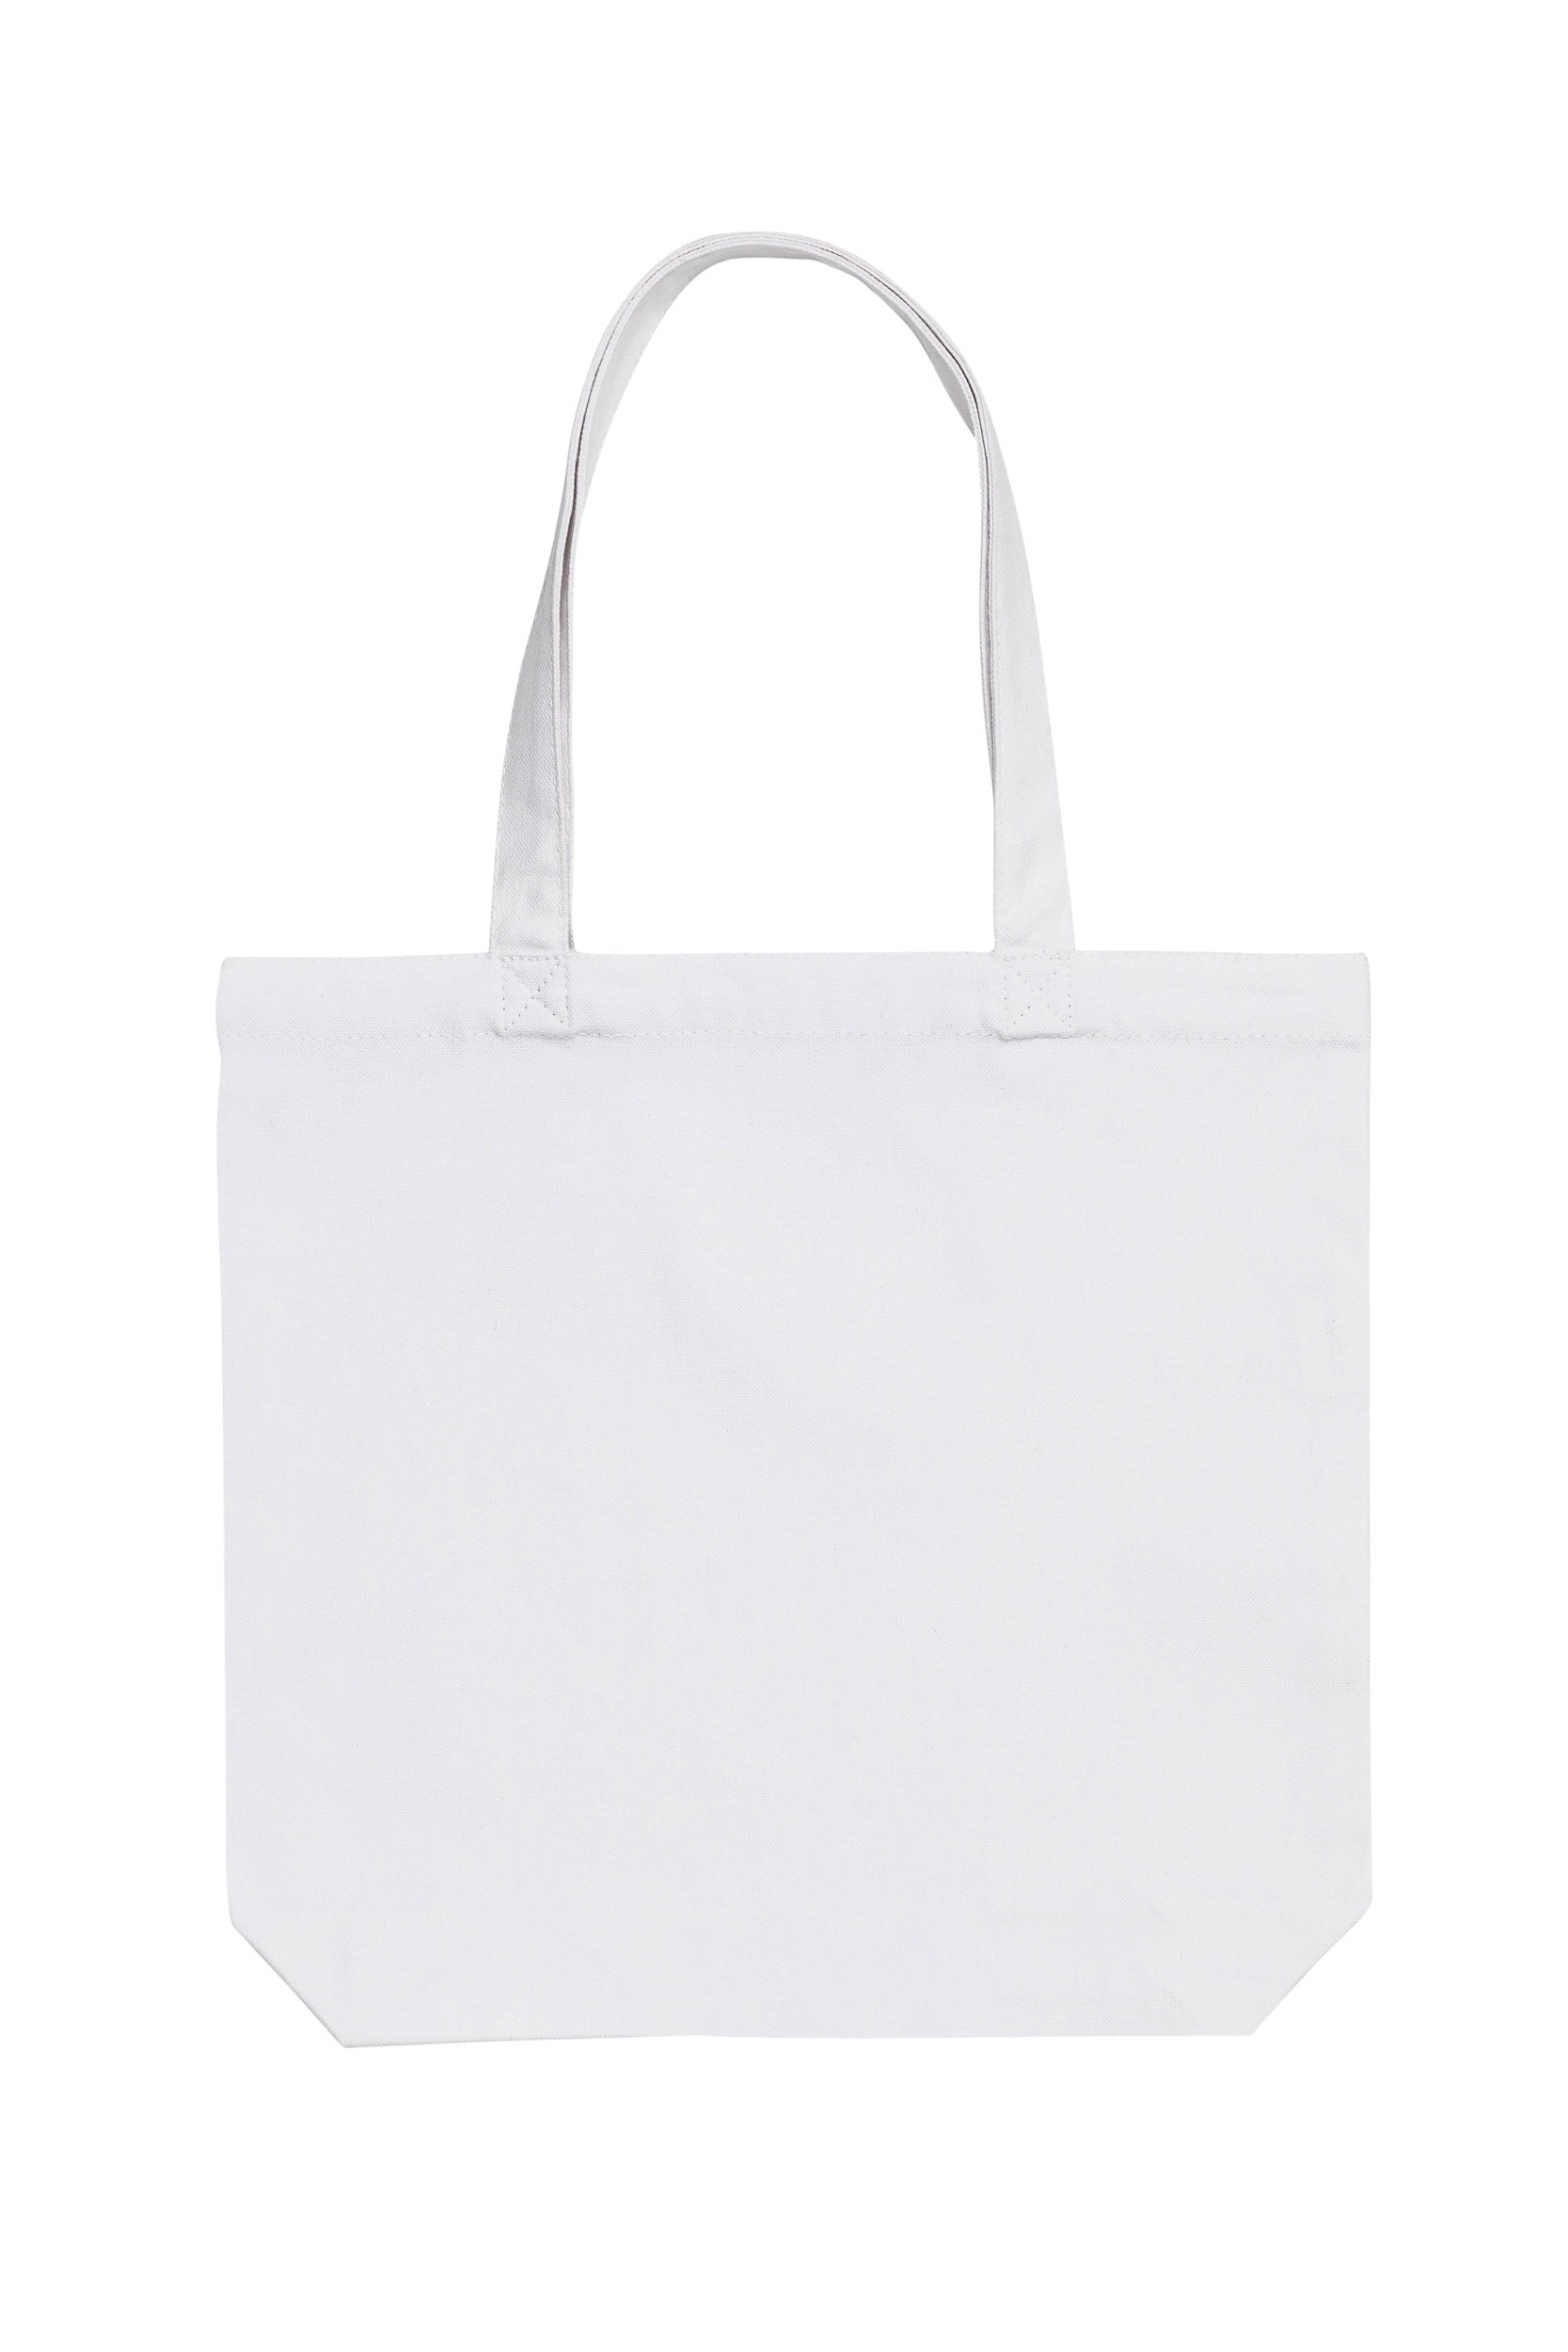 methodology Southern pivot 12pk White Cotton Tote Bags (14"x 13"x 3" - 12pk) 100% Cotton Canvas -  Great for Party Favors, Gift Bags, Shopping & DIY Crafts - White -  Walmart.com